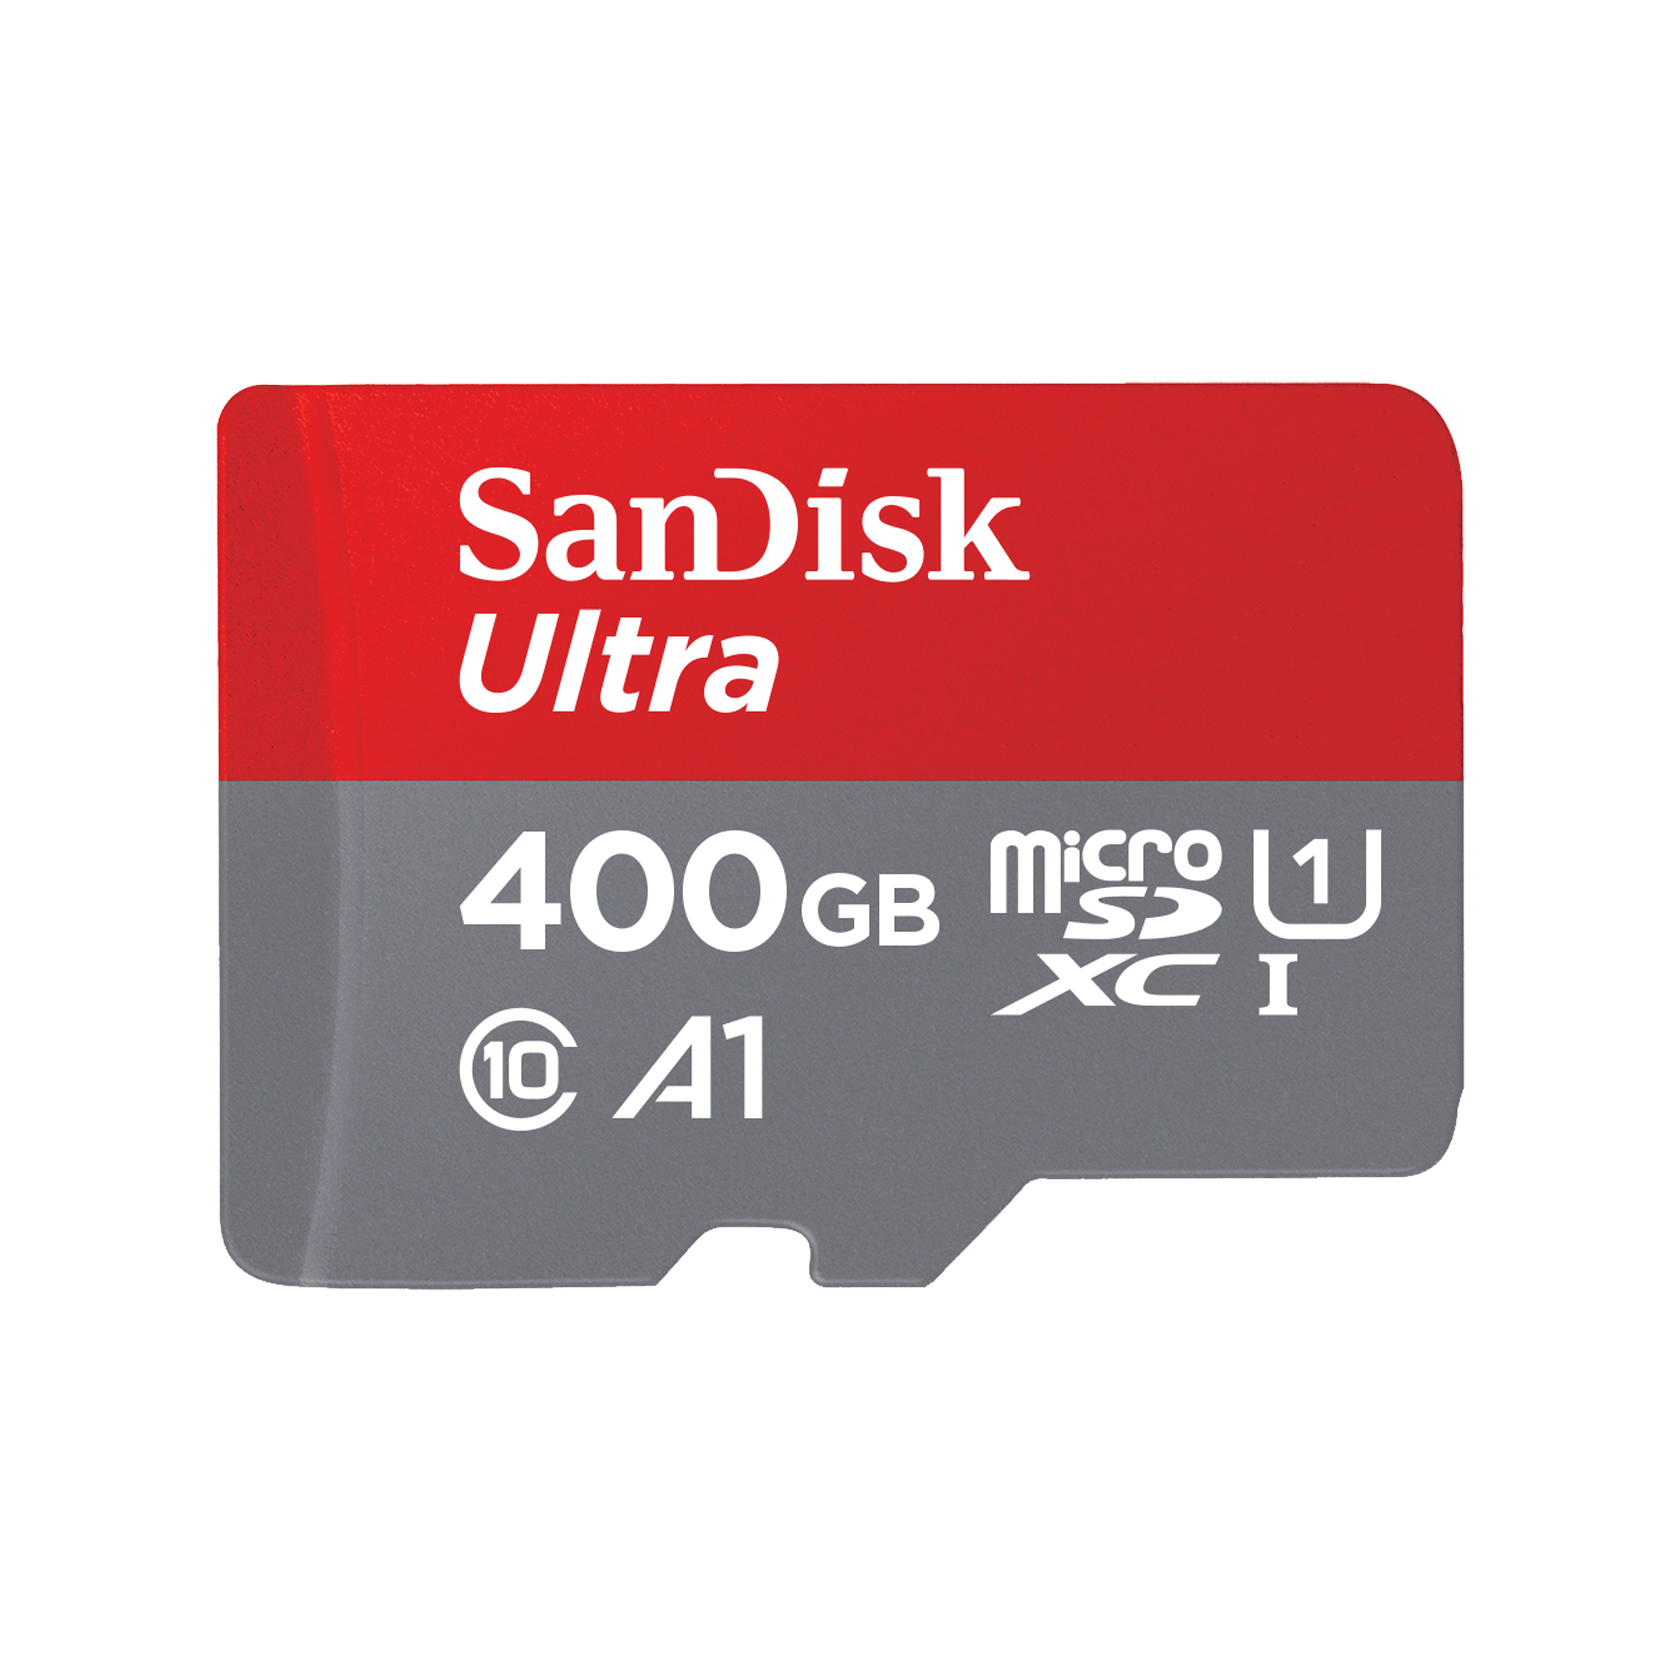 SanDisk Ultra® MicroSDXC™ UHS-I Card with Adapter - 400GB - SDSQUA4-400G-GN6MA